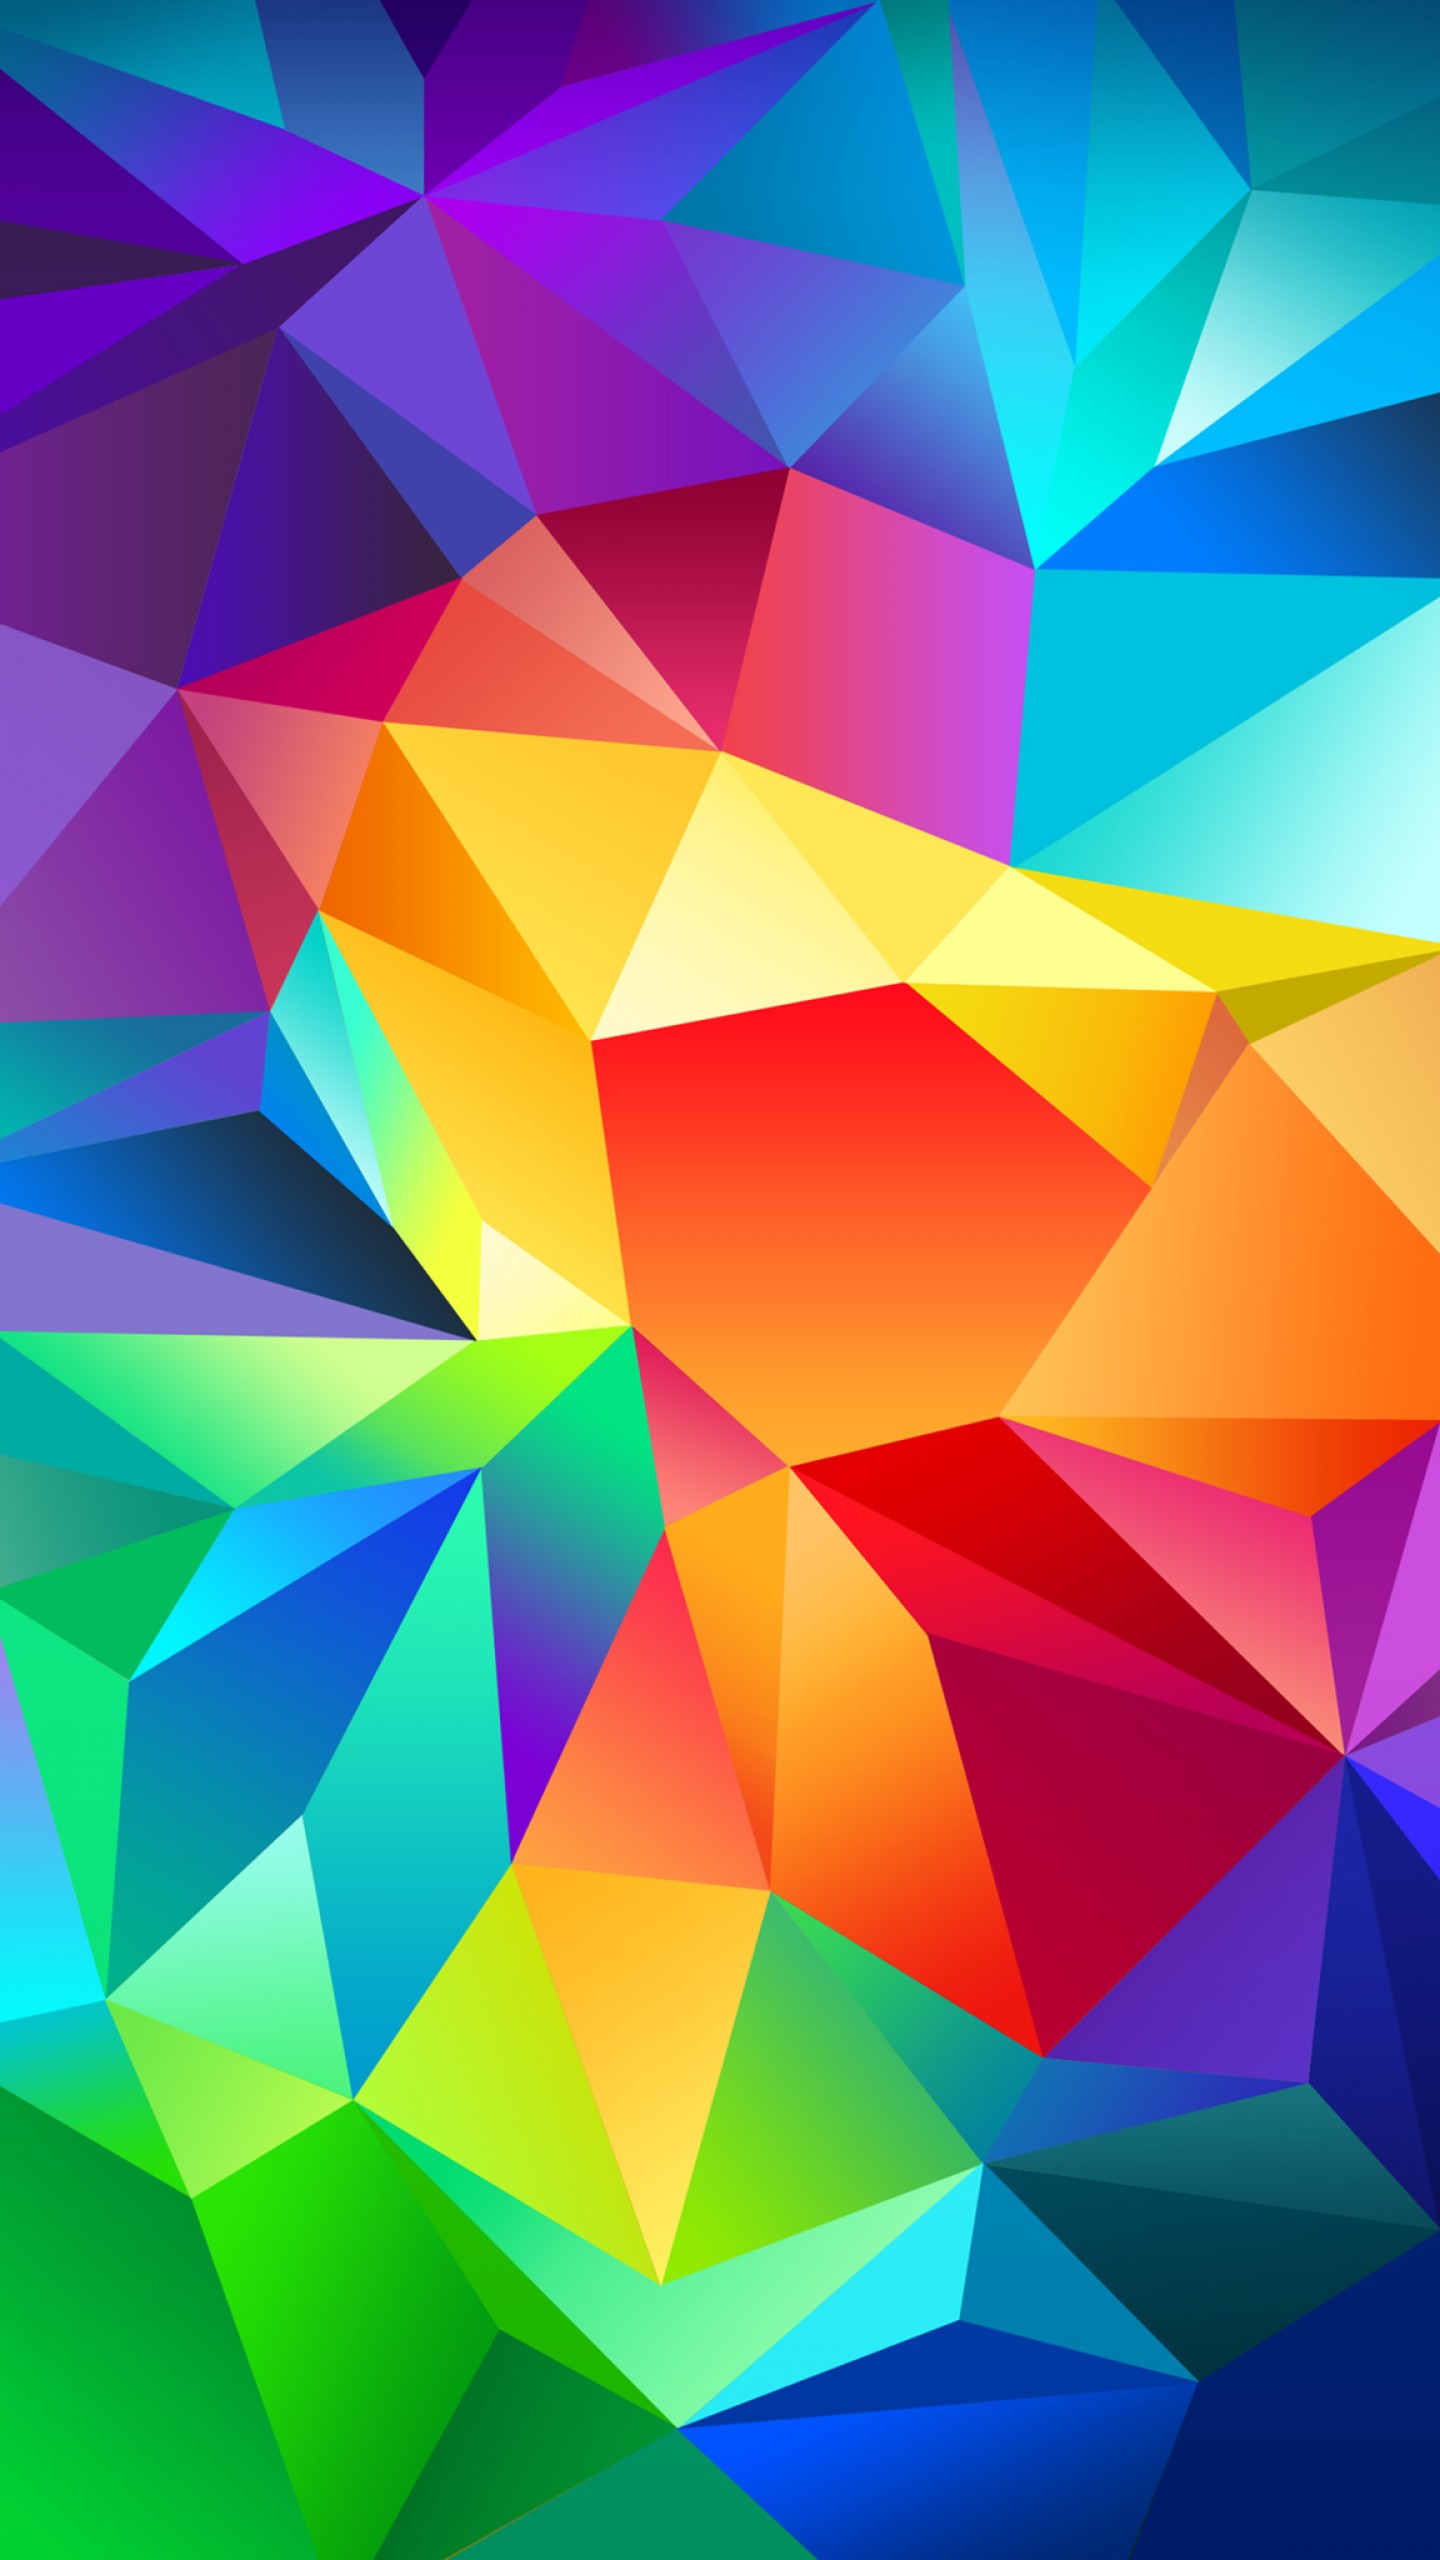 Wallpaper polygon, 4k, HD wallpaper, android wallpaper, triangle, background, orange, red, blue, pattern, OS